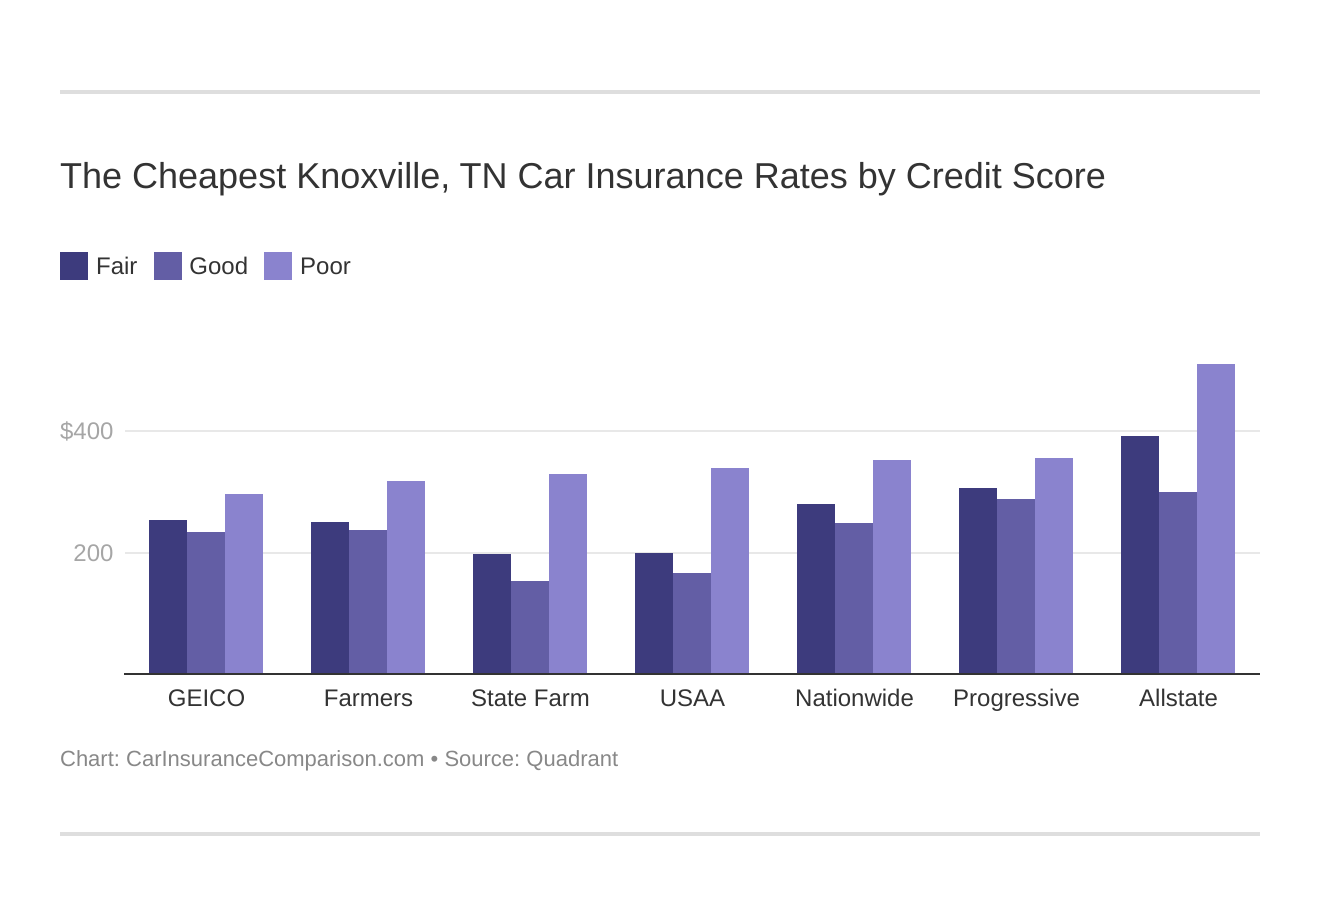 The Cheapest Knoxville, TN Car Insurance Rates by Credit Score